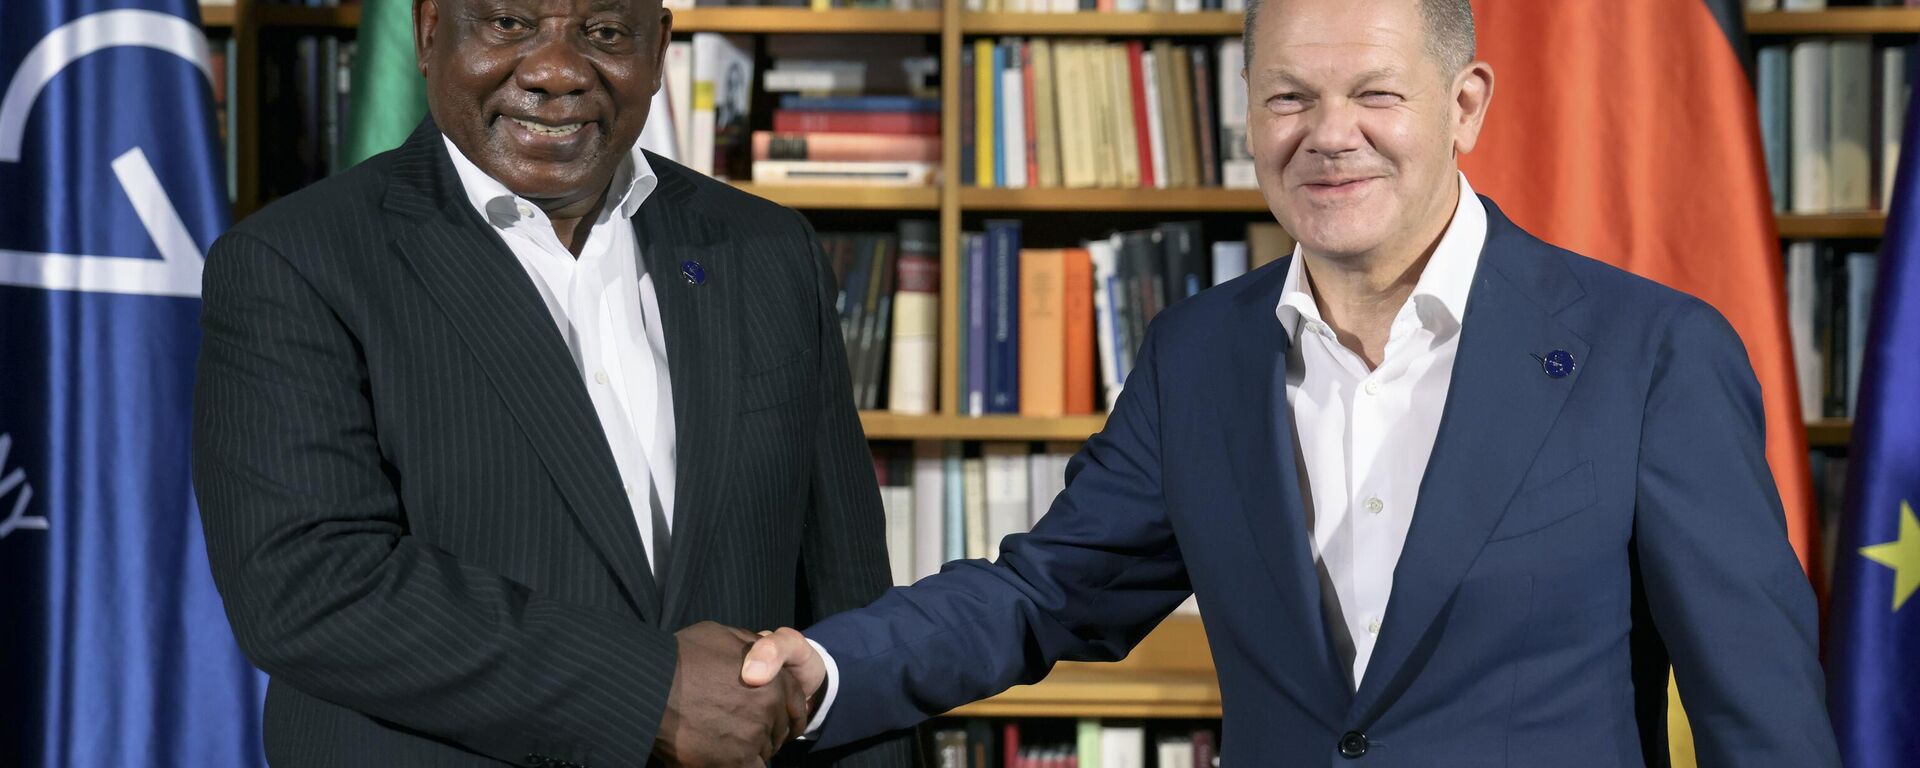 South African President Cyril Ramaphosa, left and German Chancellor Olaf Scholz shake hands as they attend a bilateral meeting on the sidelines of the G7 leaders summit at the Bavarian resort of Schloss Elmau castle, in Kruen, near Garmisch-Partenkirchen, Germany, Monday, June 27, 2022.  - Sputnik International, 1920, 11.12.2022